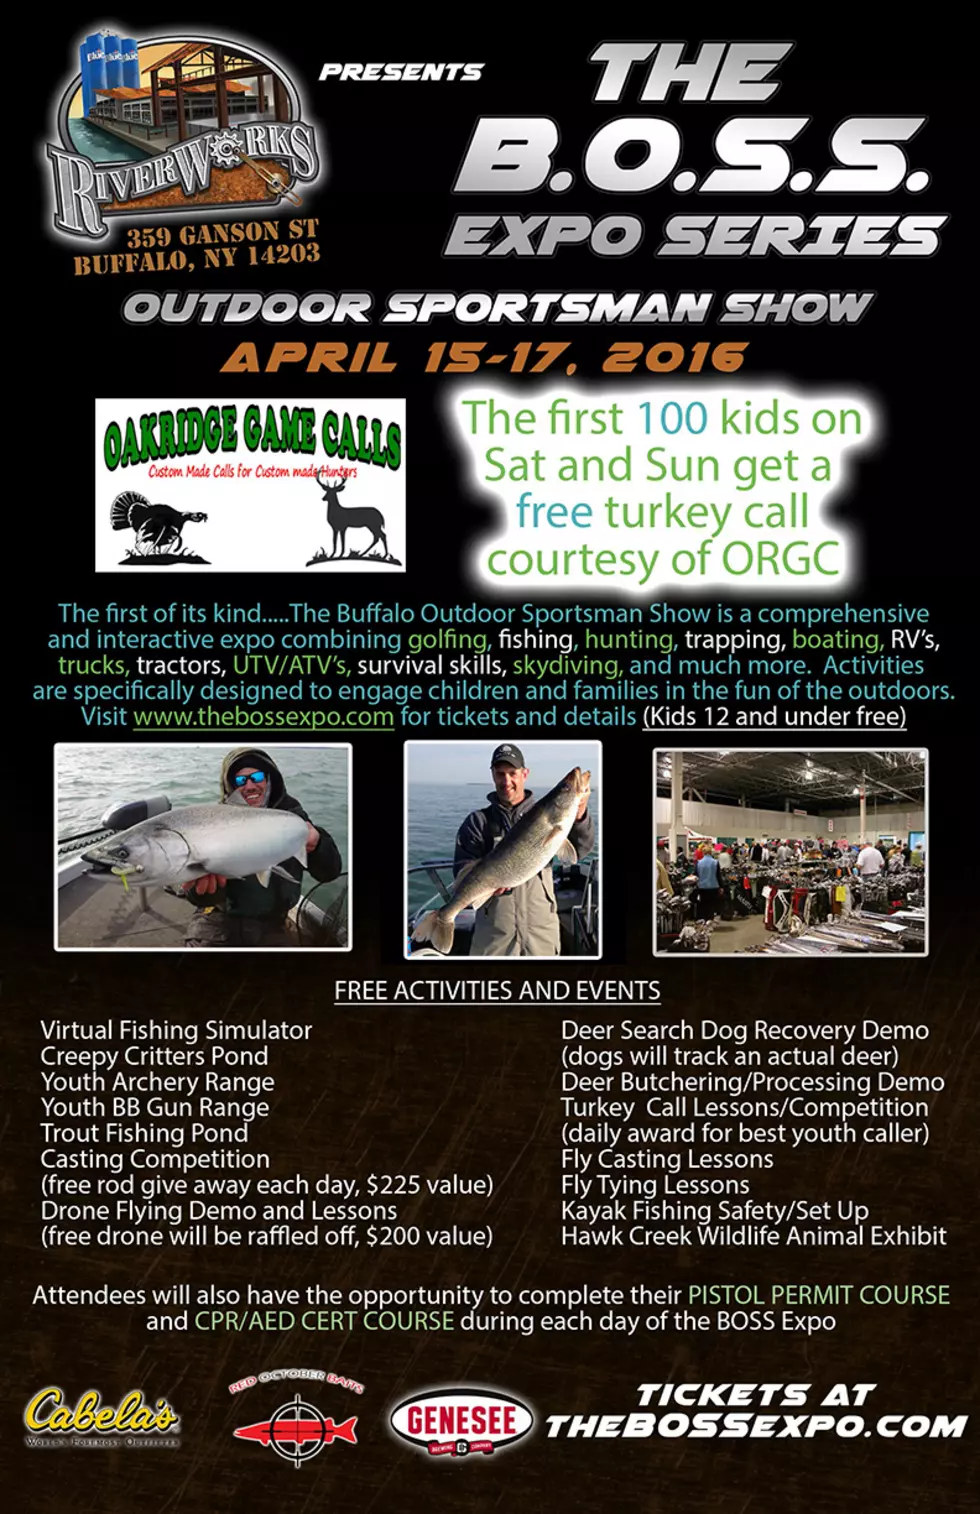 Major Fishing + Hunting Show Happens at RiverWorks This Weekend [VIDEO]